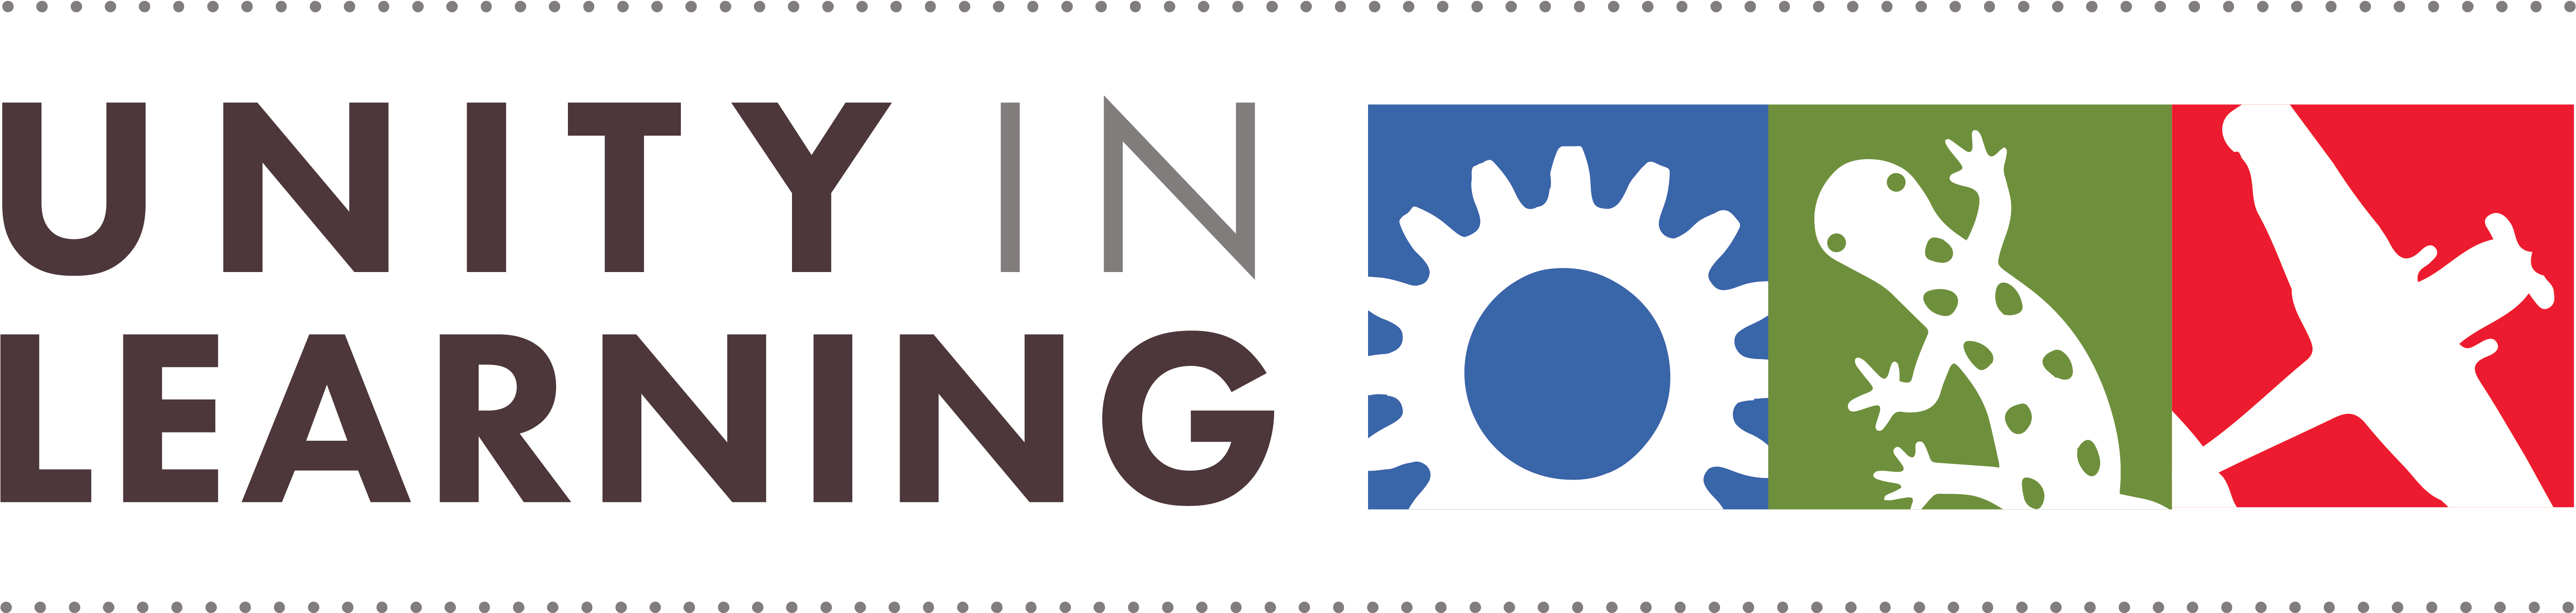 Unityin Learning Banner PNG